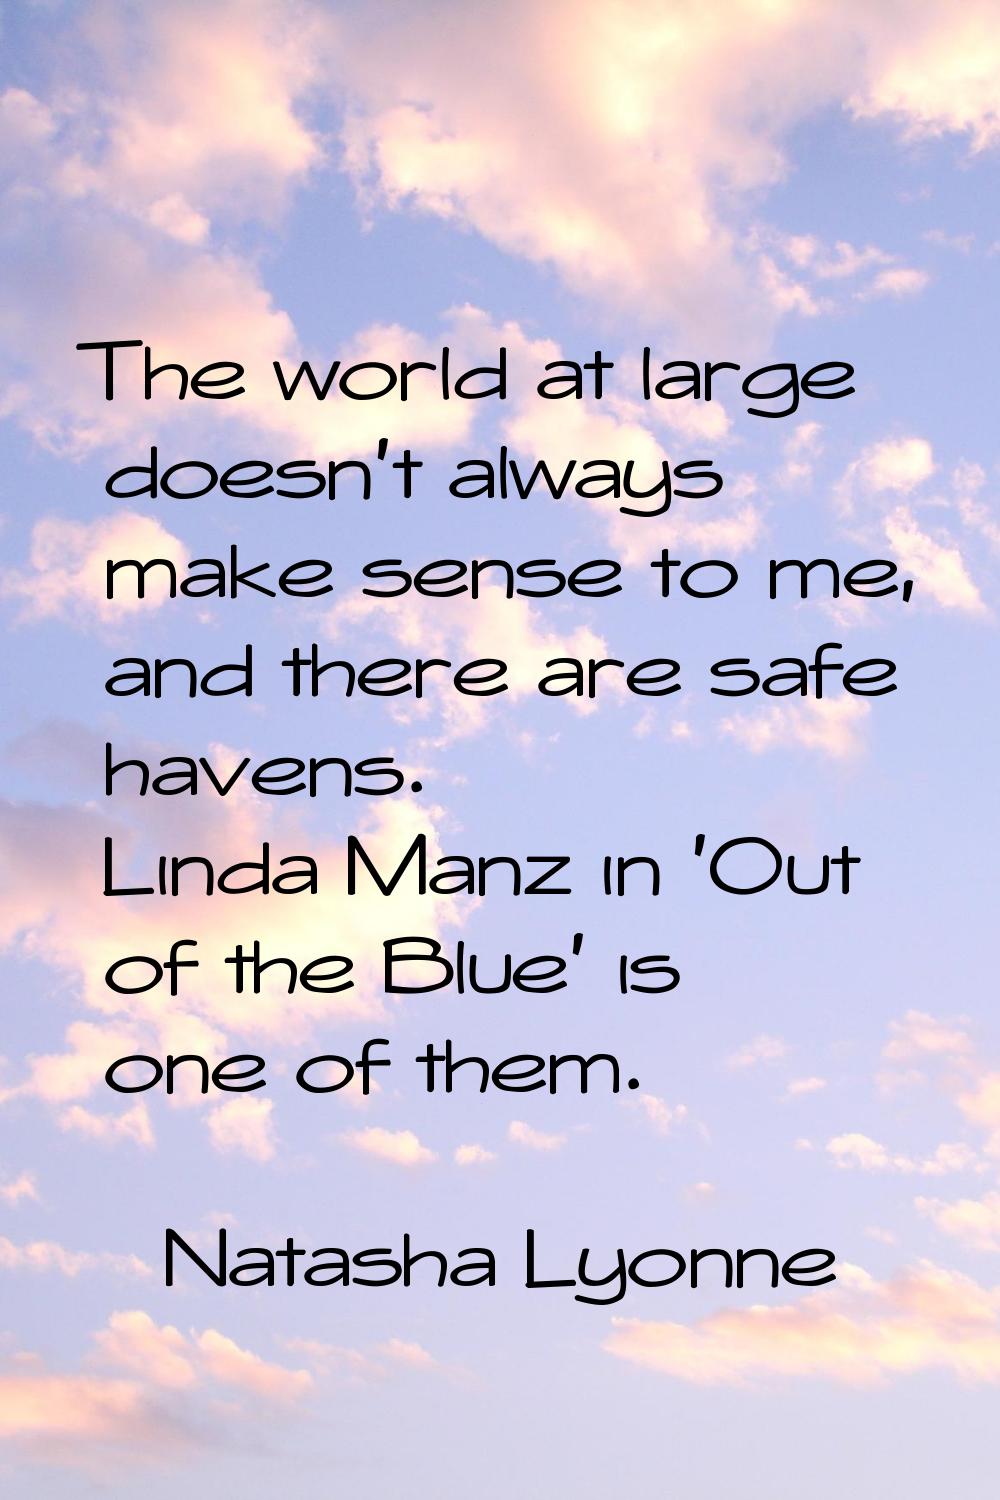 The world at large doesn't always make sense to me, and there are safe havens. Linda Manz in 'Out o